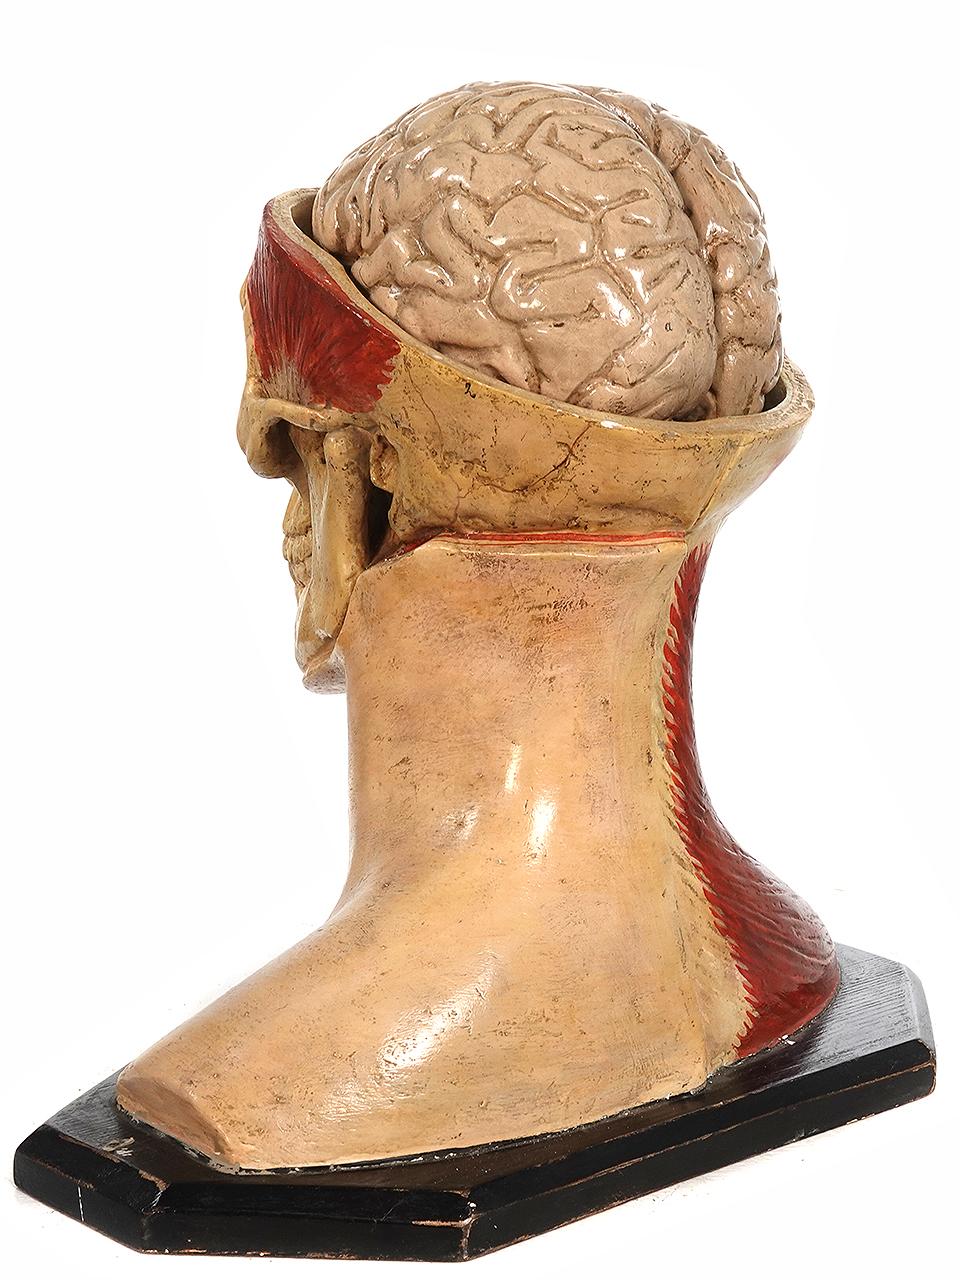 19th Century 1890s Hand Painted Life Size Anatomical of Head